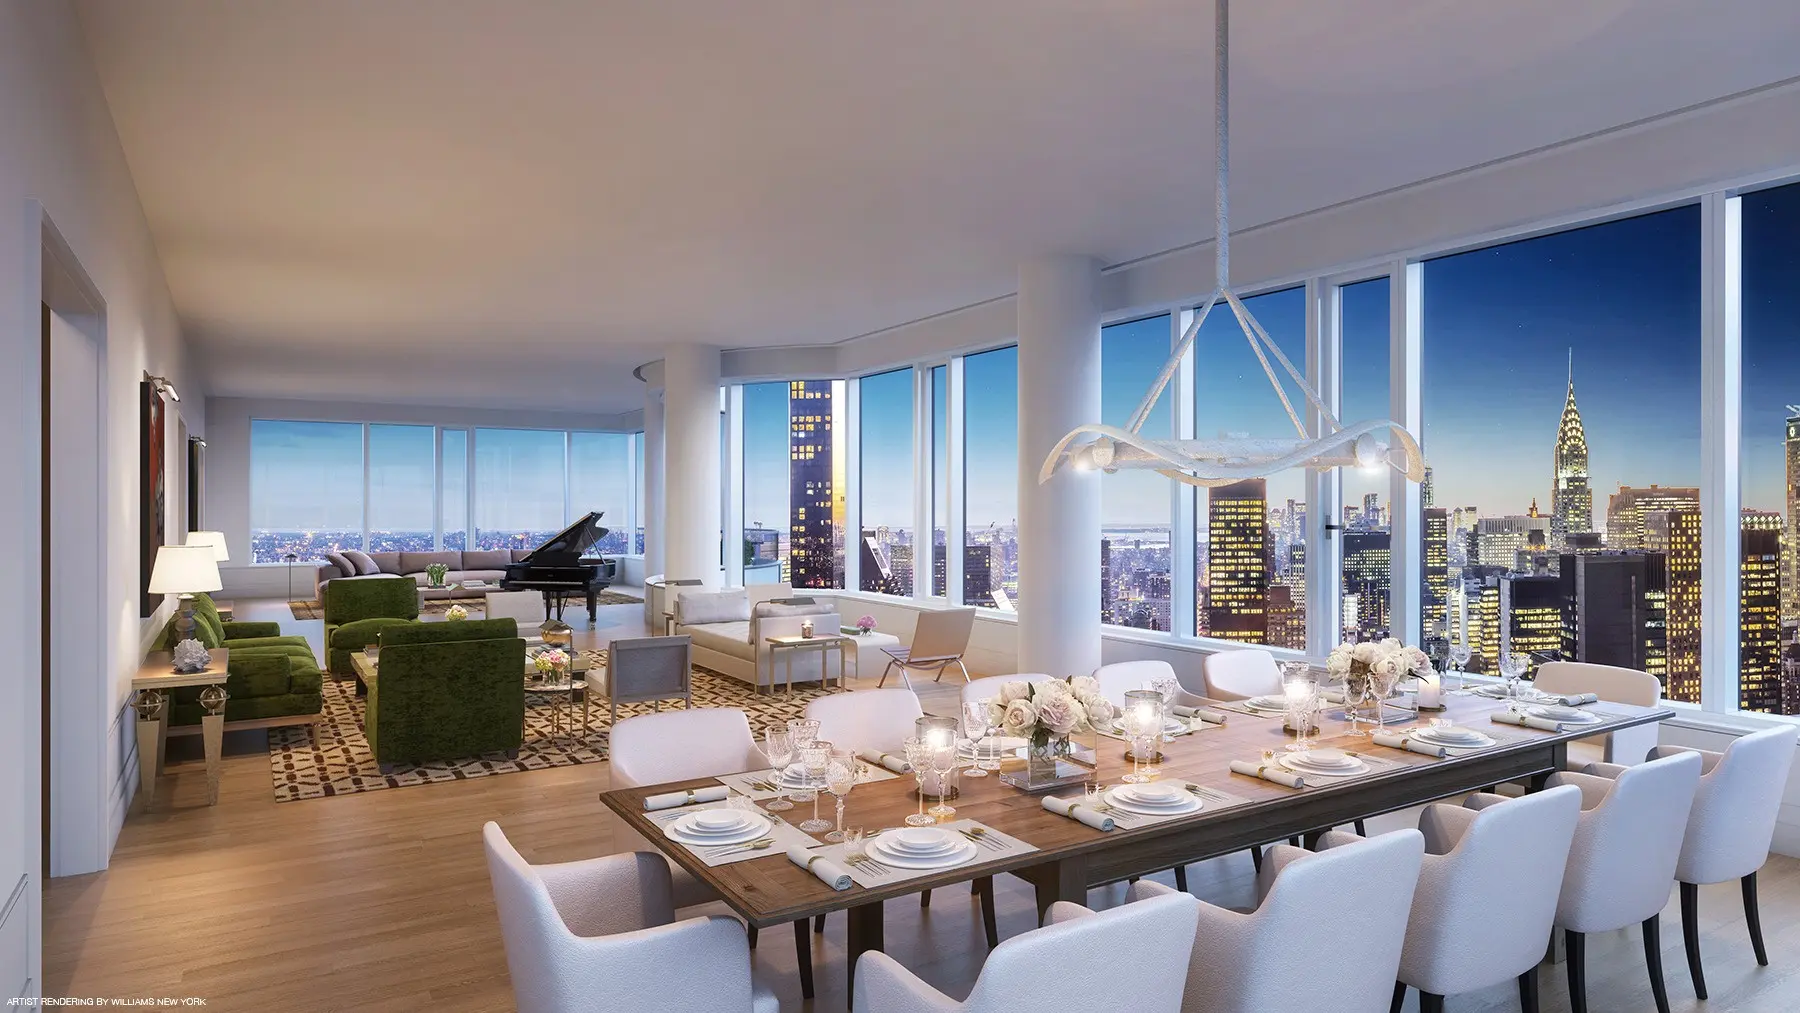 252 East 57th St. in Sutton Place : Sales, Rentals, Floorplans